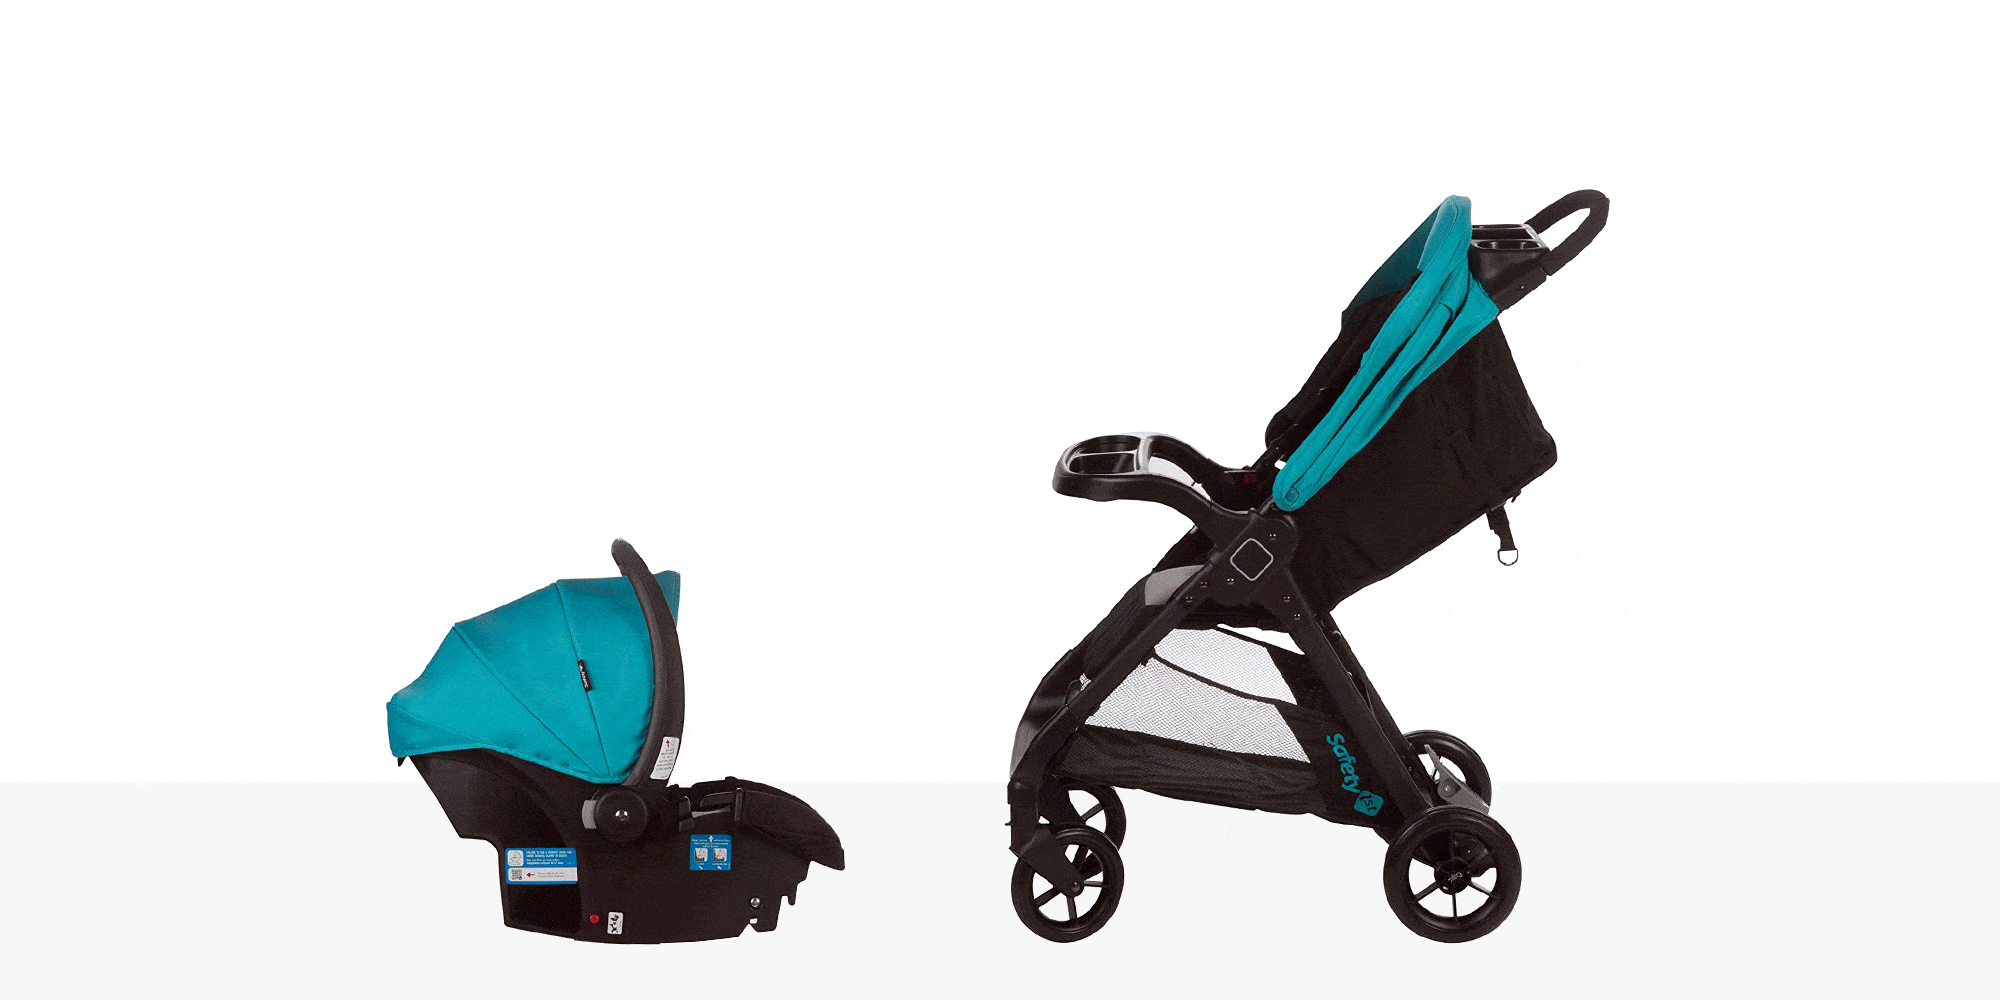 compact stroller carseat combo